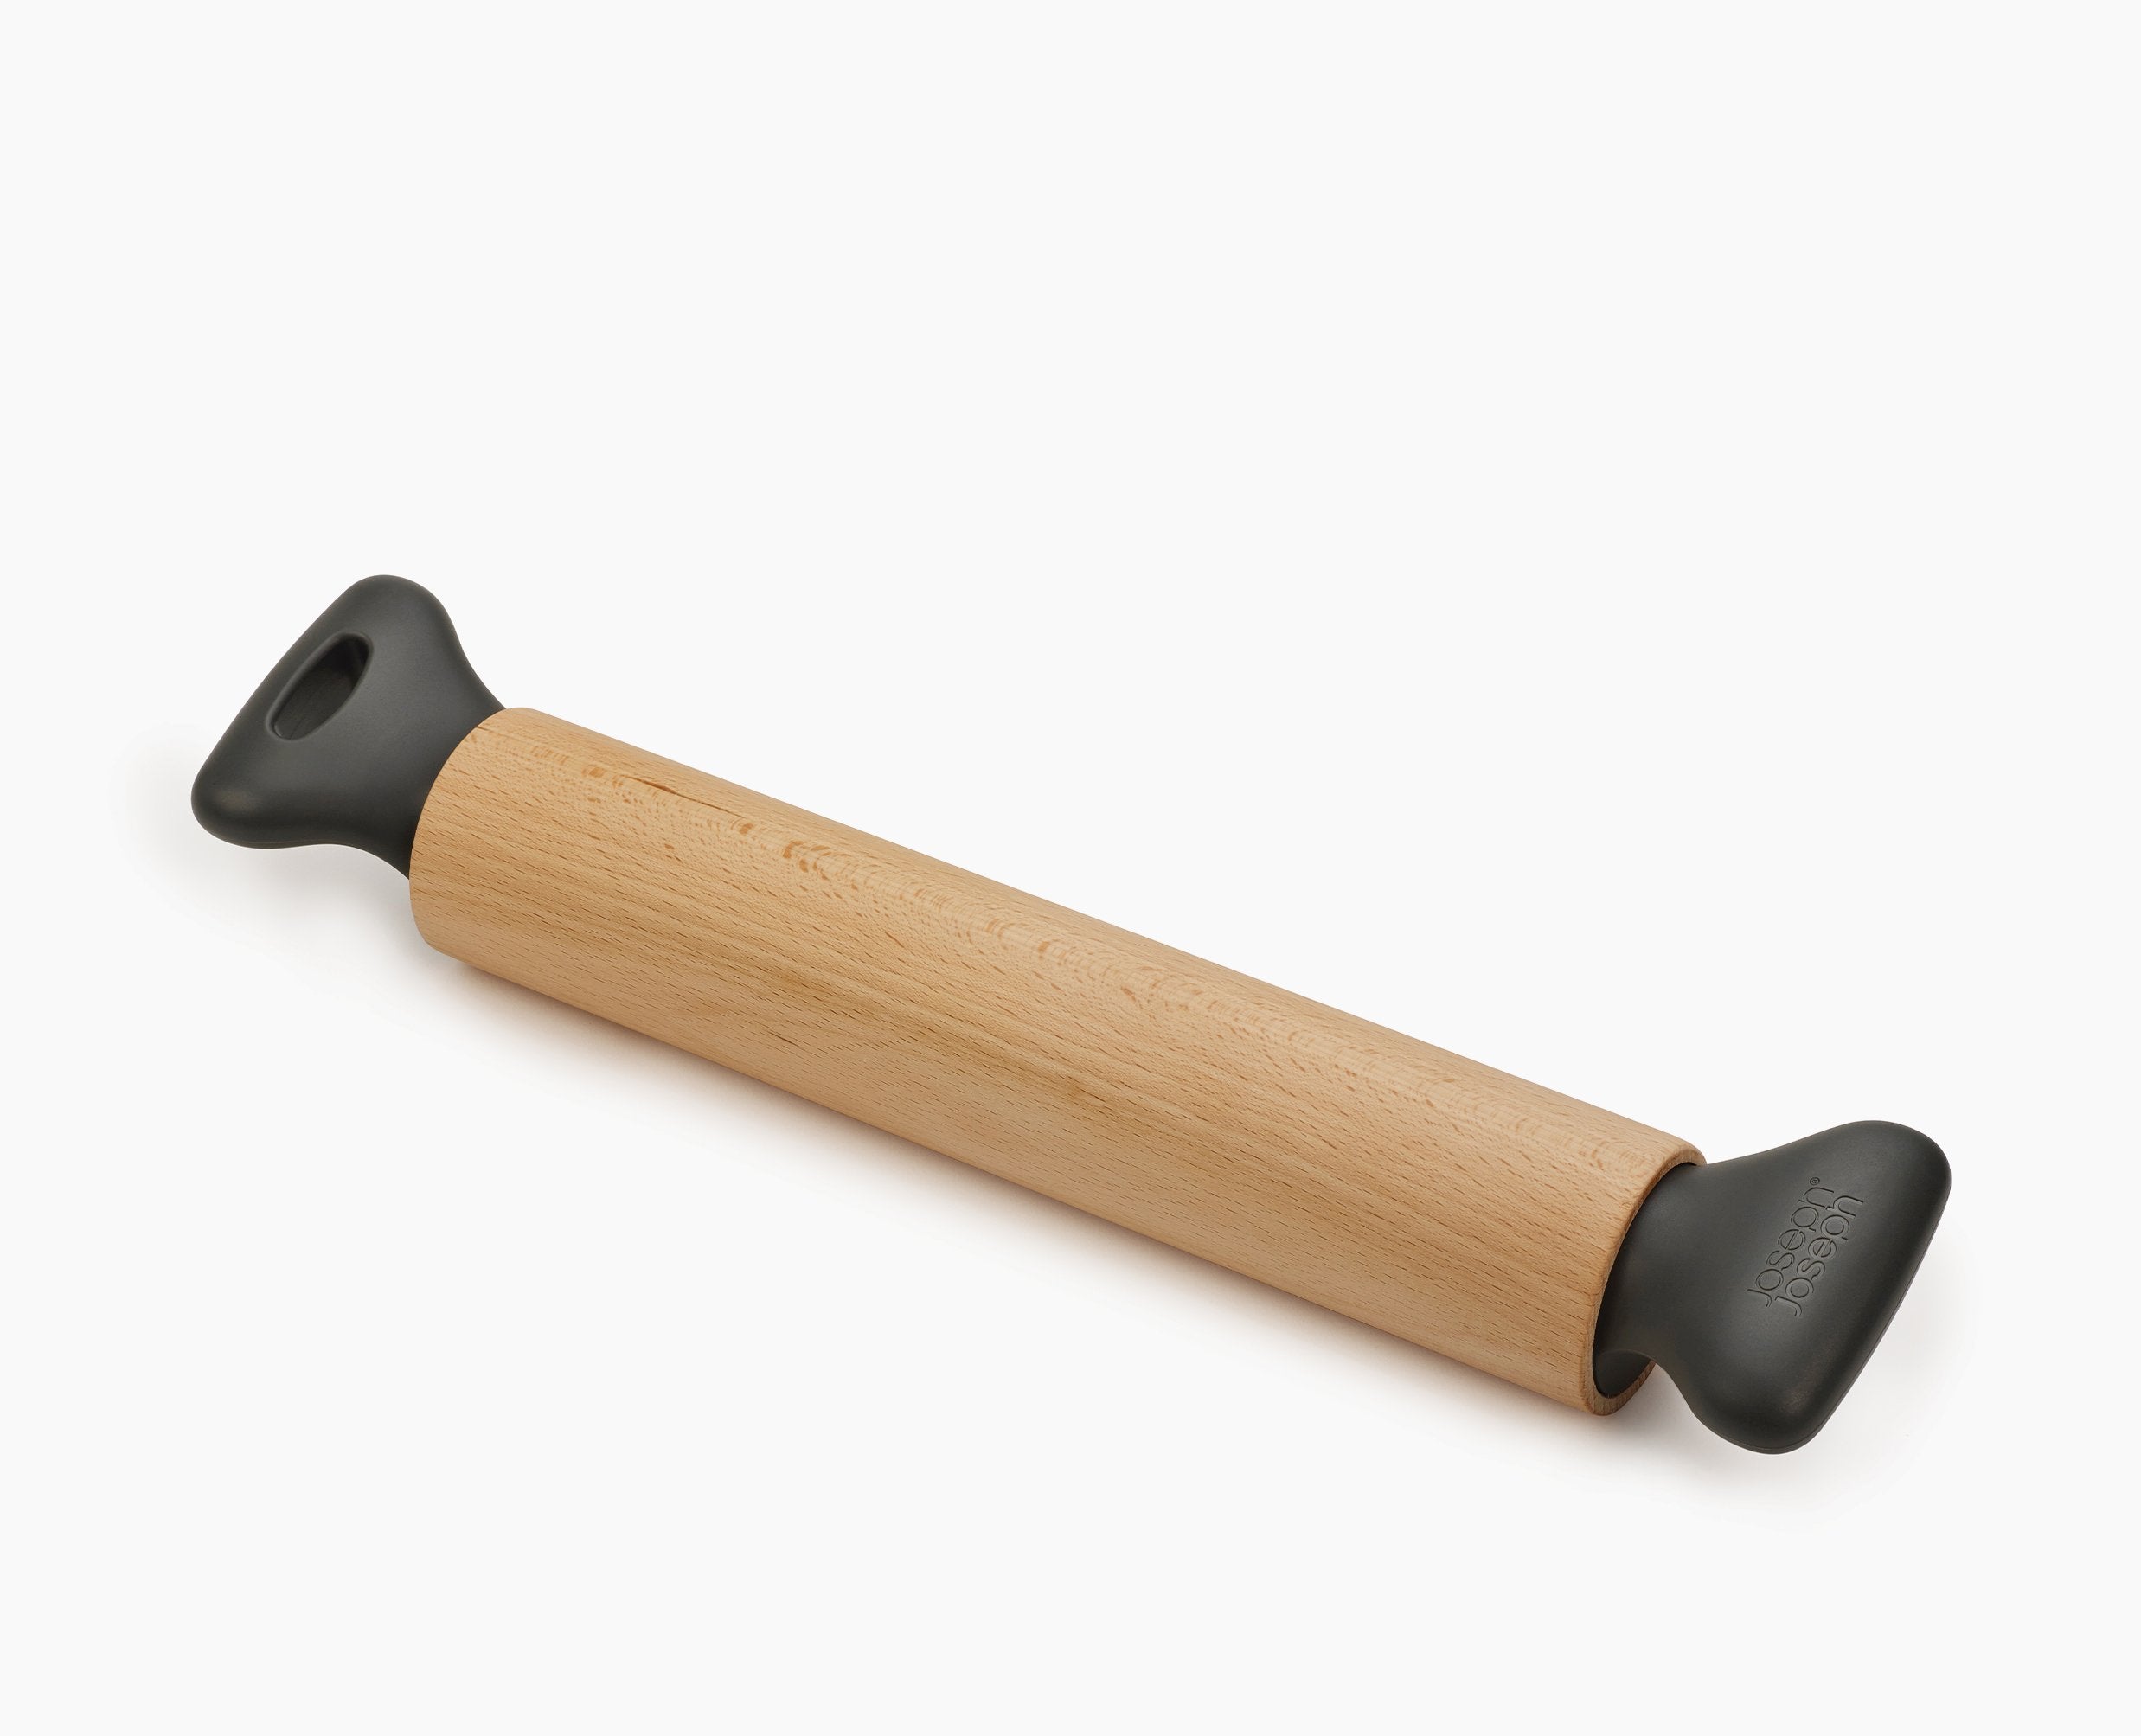 BEON.COM.AU  This unique rolling pin features wide, contoured handles that provide comfortable support for the hands and wrists whilst also preventing your knuckles from hitting the worktop as you roll.  Wide, contoured handles for a comfortable grip High clearance for knuckles when rolling Won’t accidentall... Joseph Joseph at BEON.COM.AU